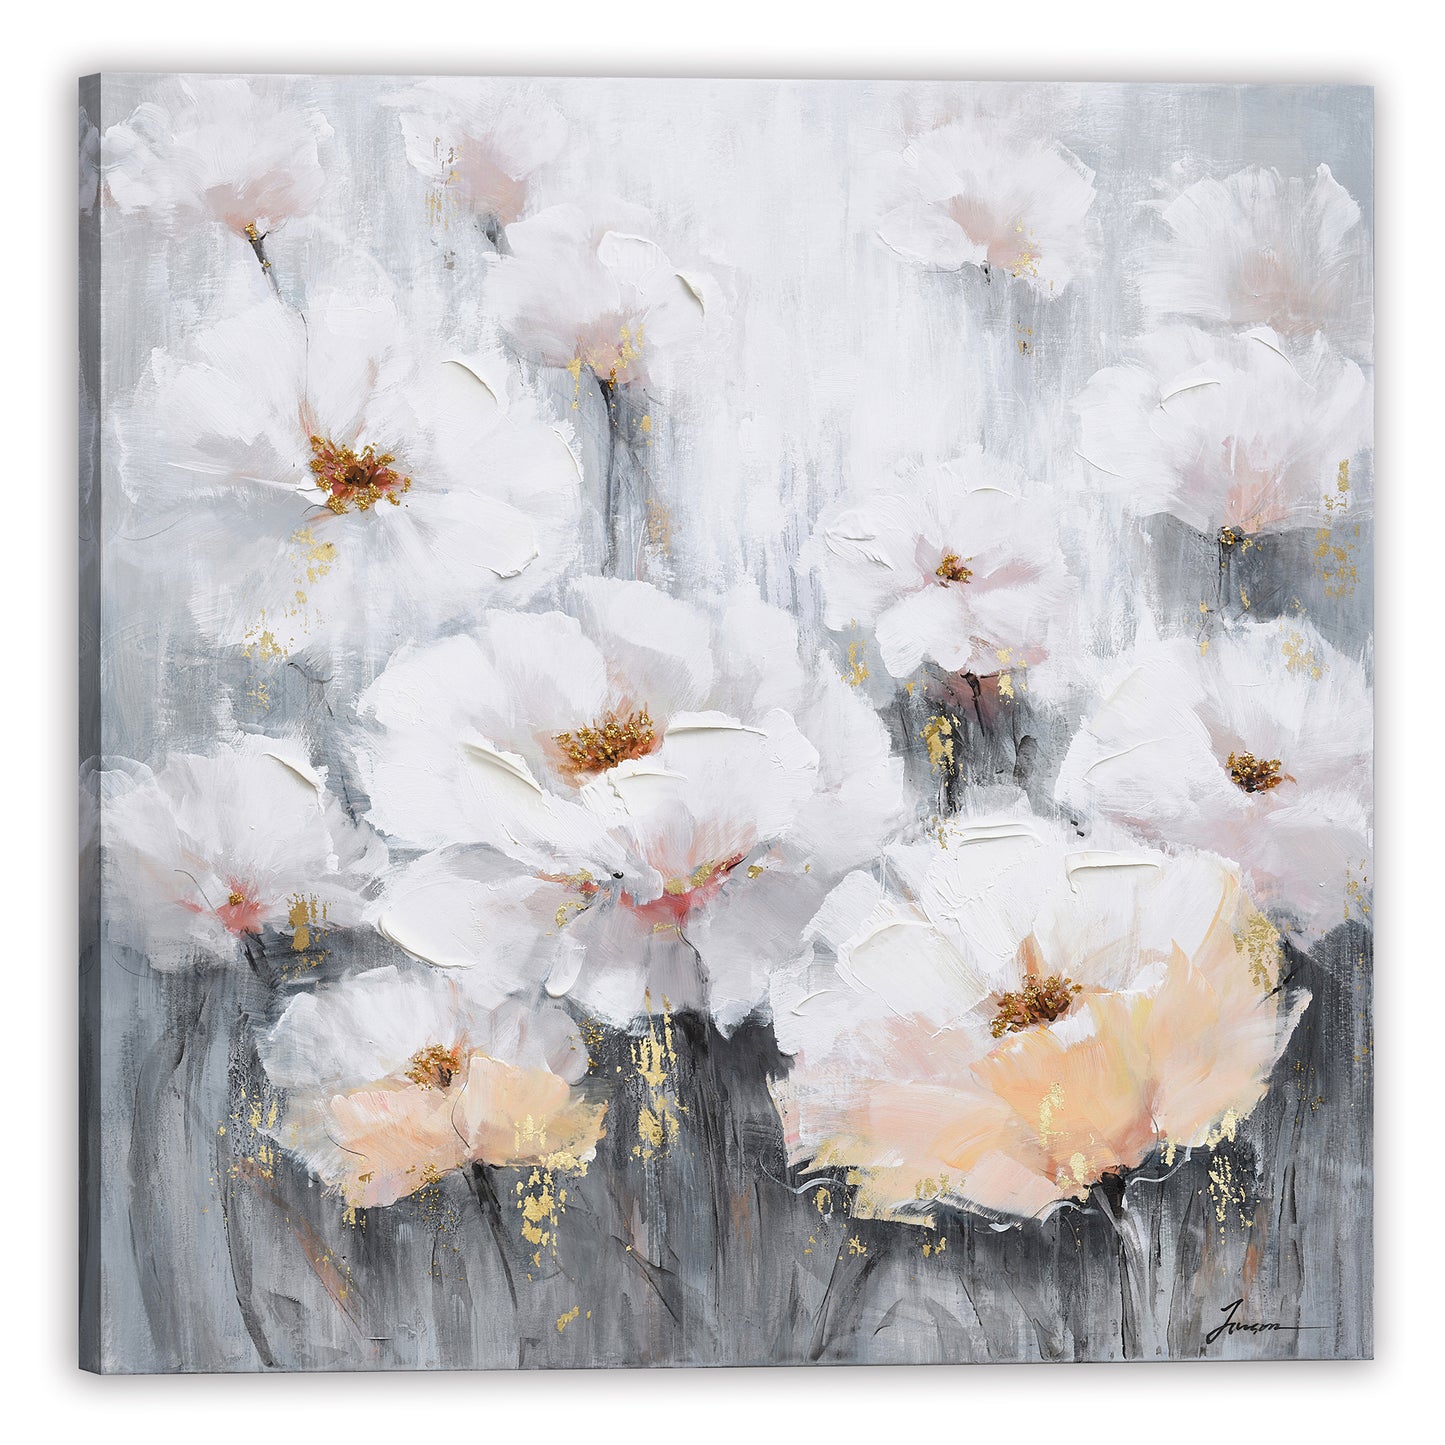 Flowers with gold foil - Oil Painting on Wrapped Canvas, Wall art. wall art, canvas artwork for living room, bedroom, office